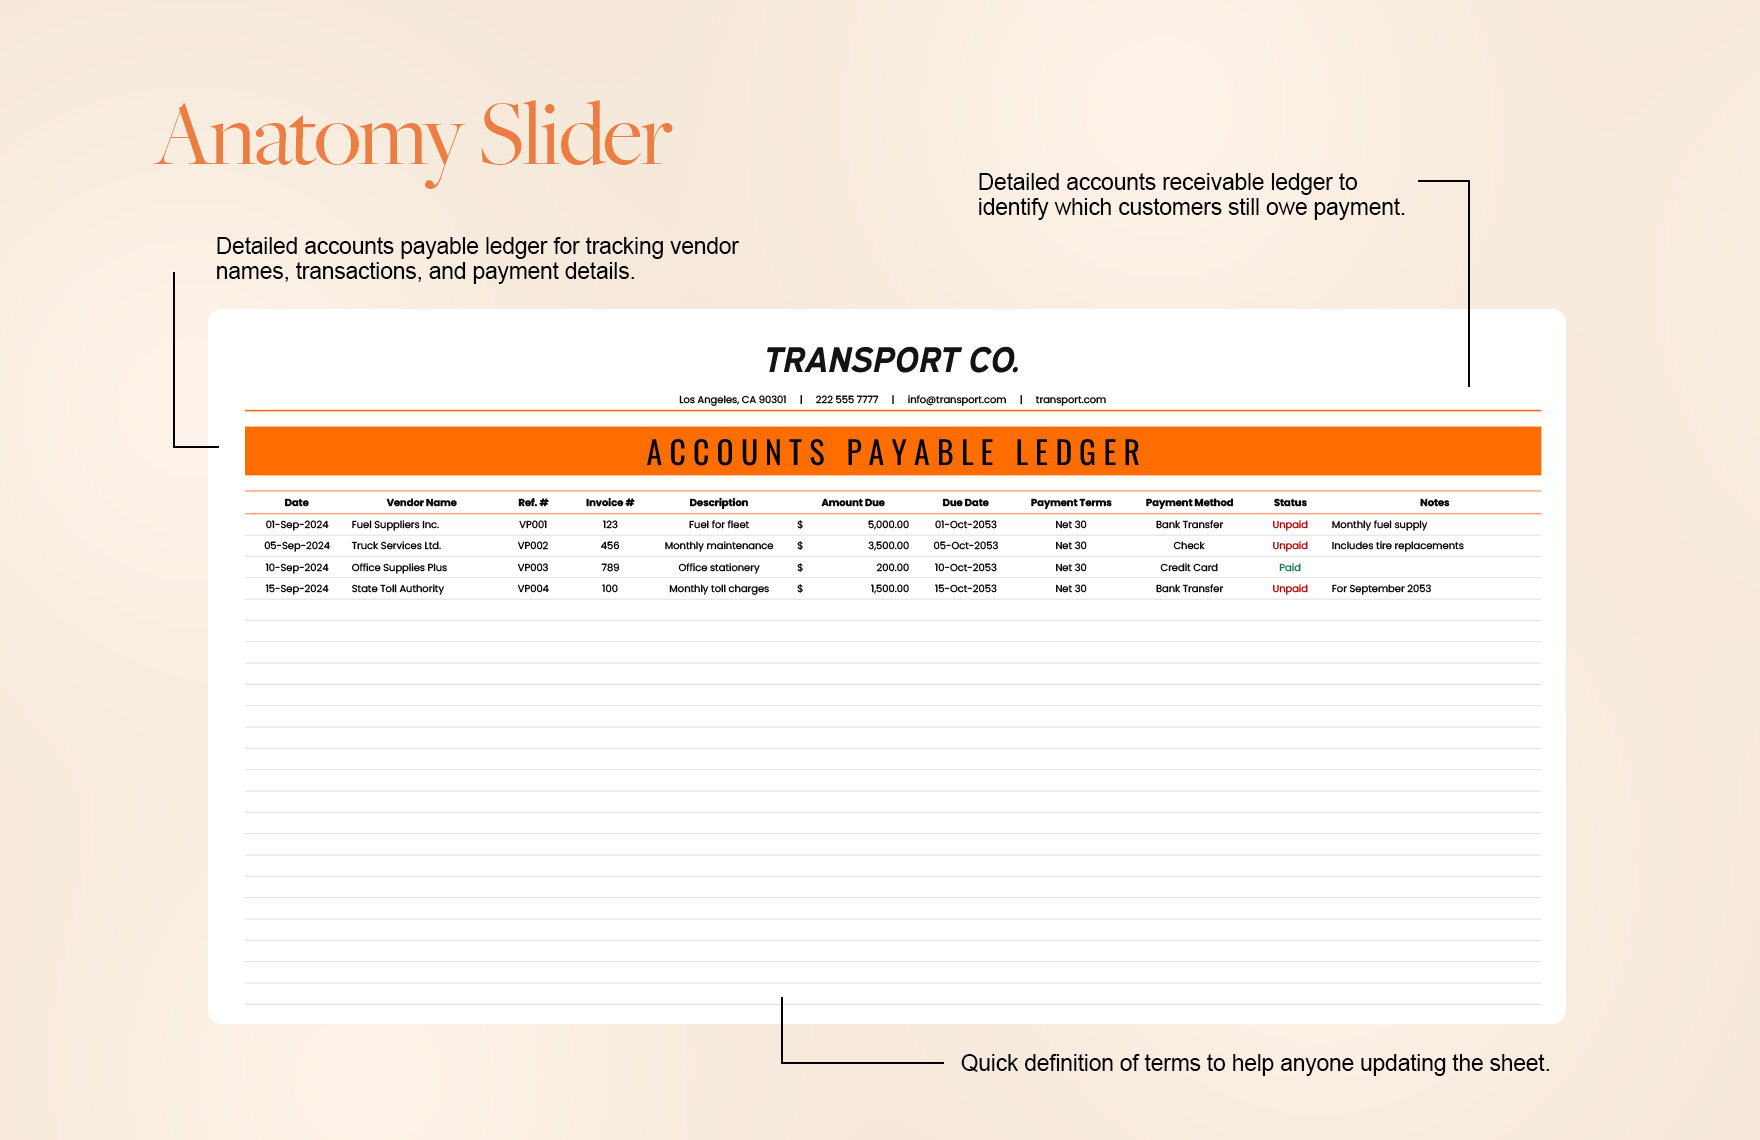 Transport and Logistics Accounts Payable and Receivable Ledger Template